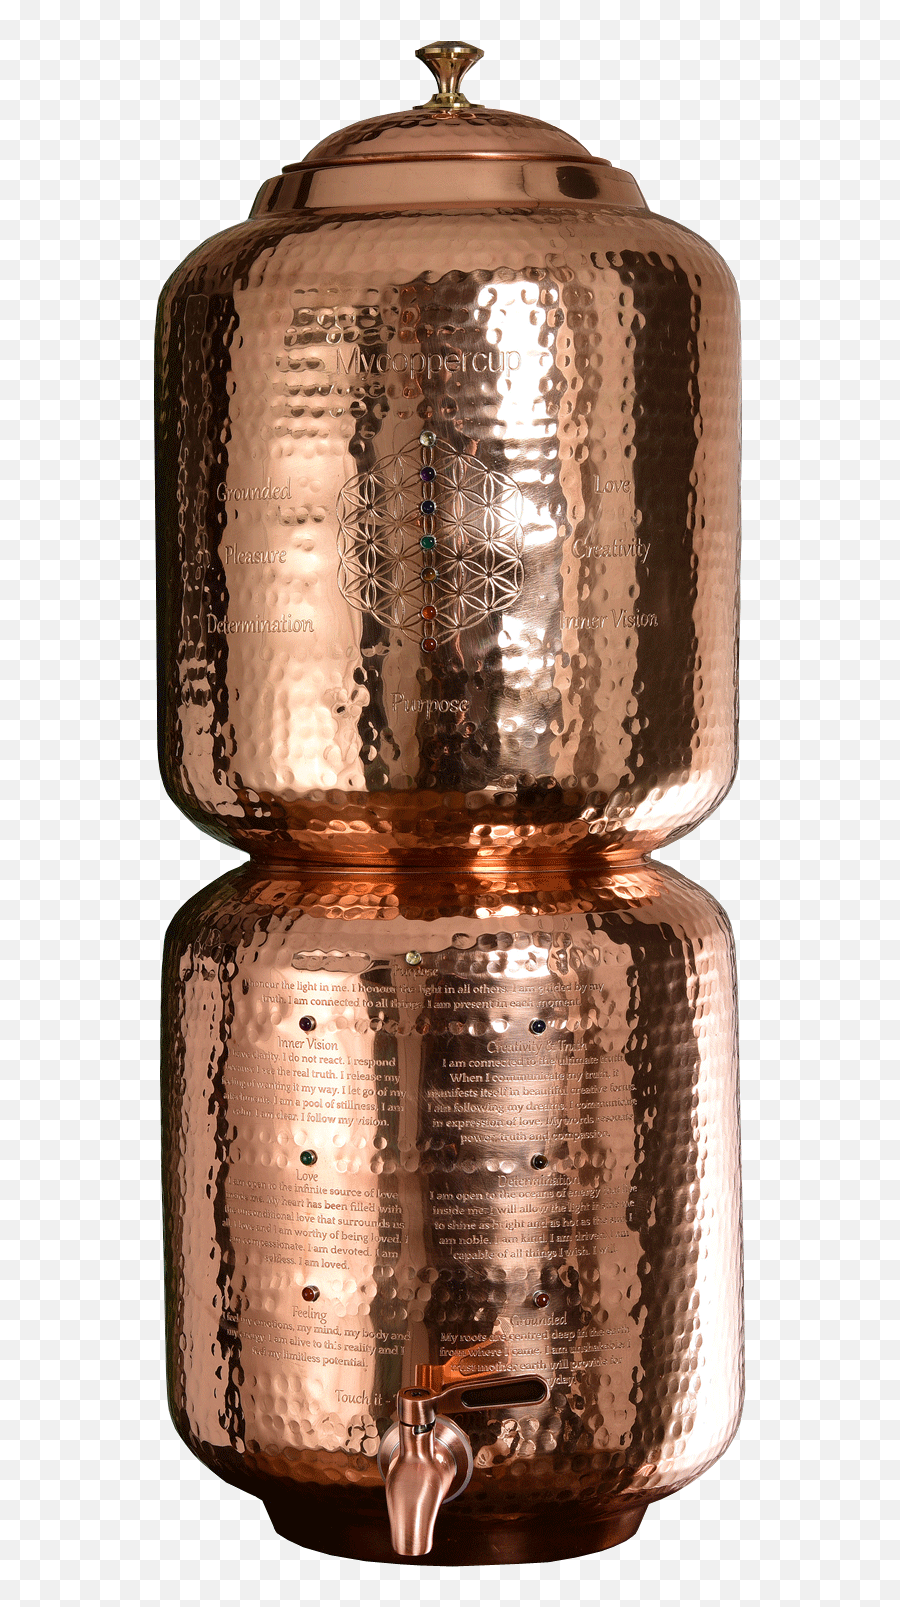 Fluoride Water Filter - My Copper Cup Emoji,Lantern Color Emotions